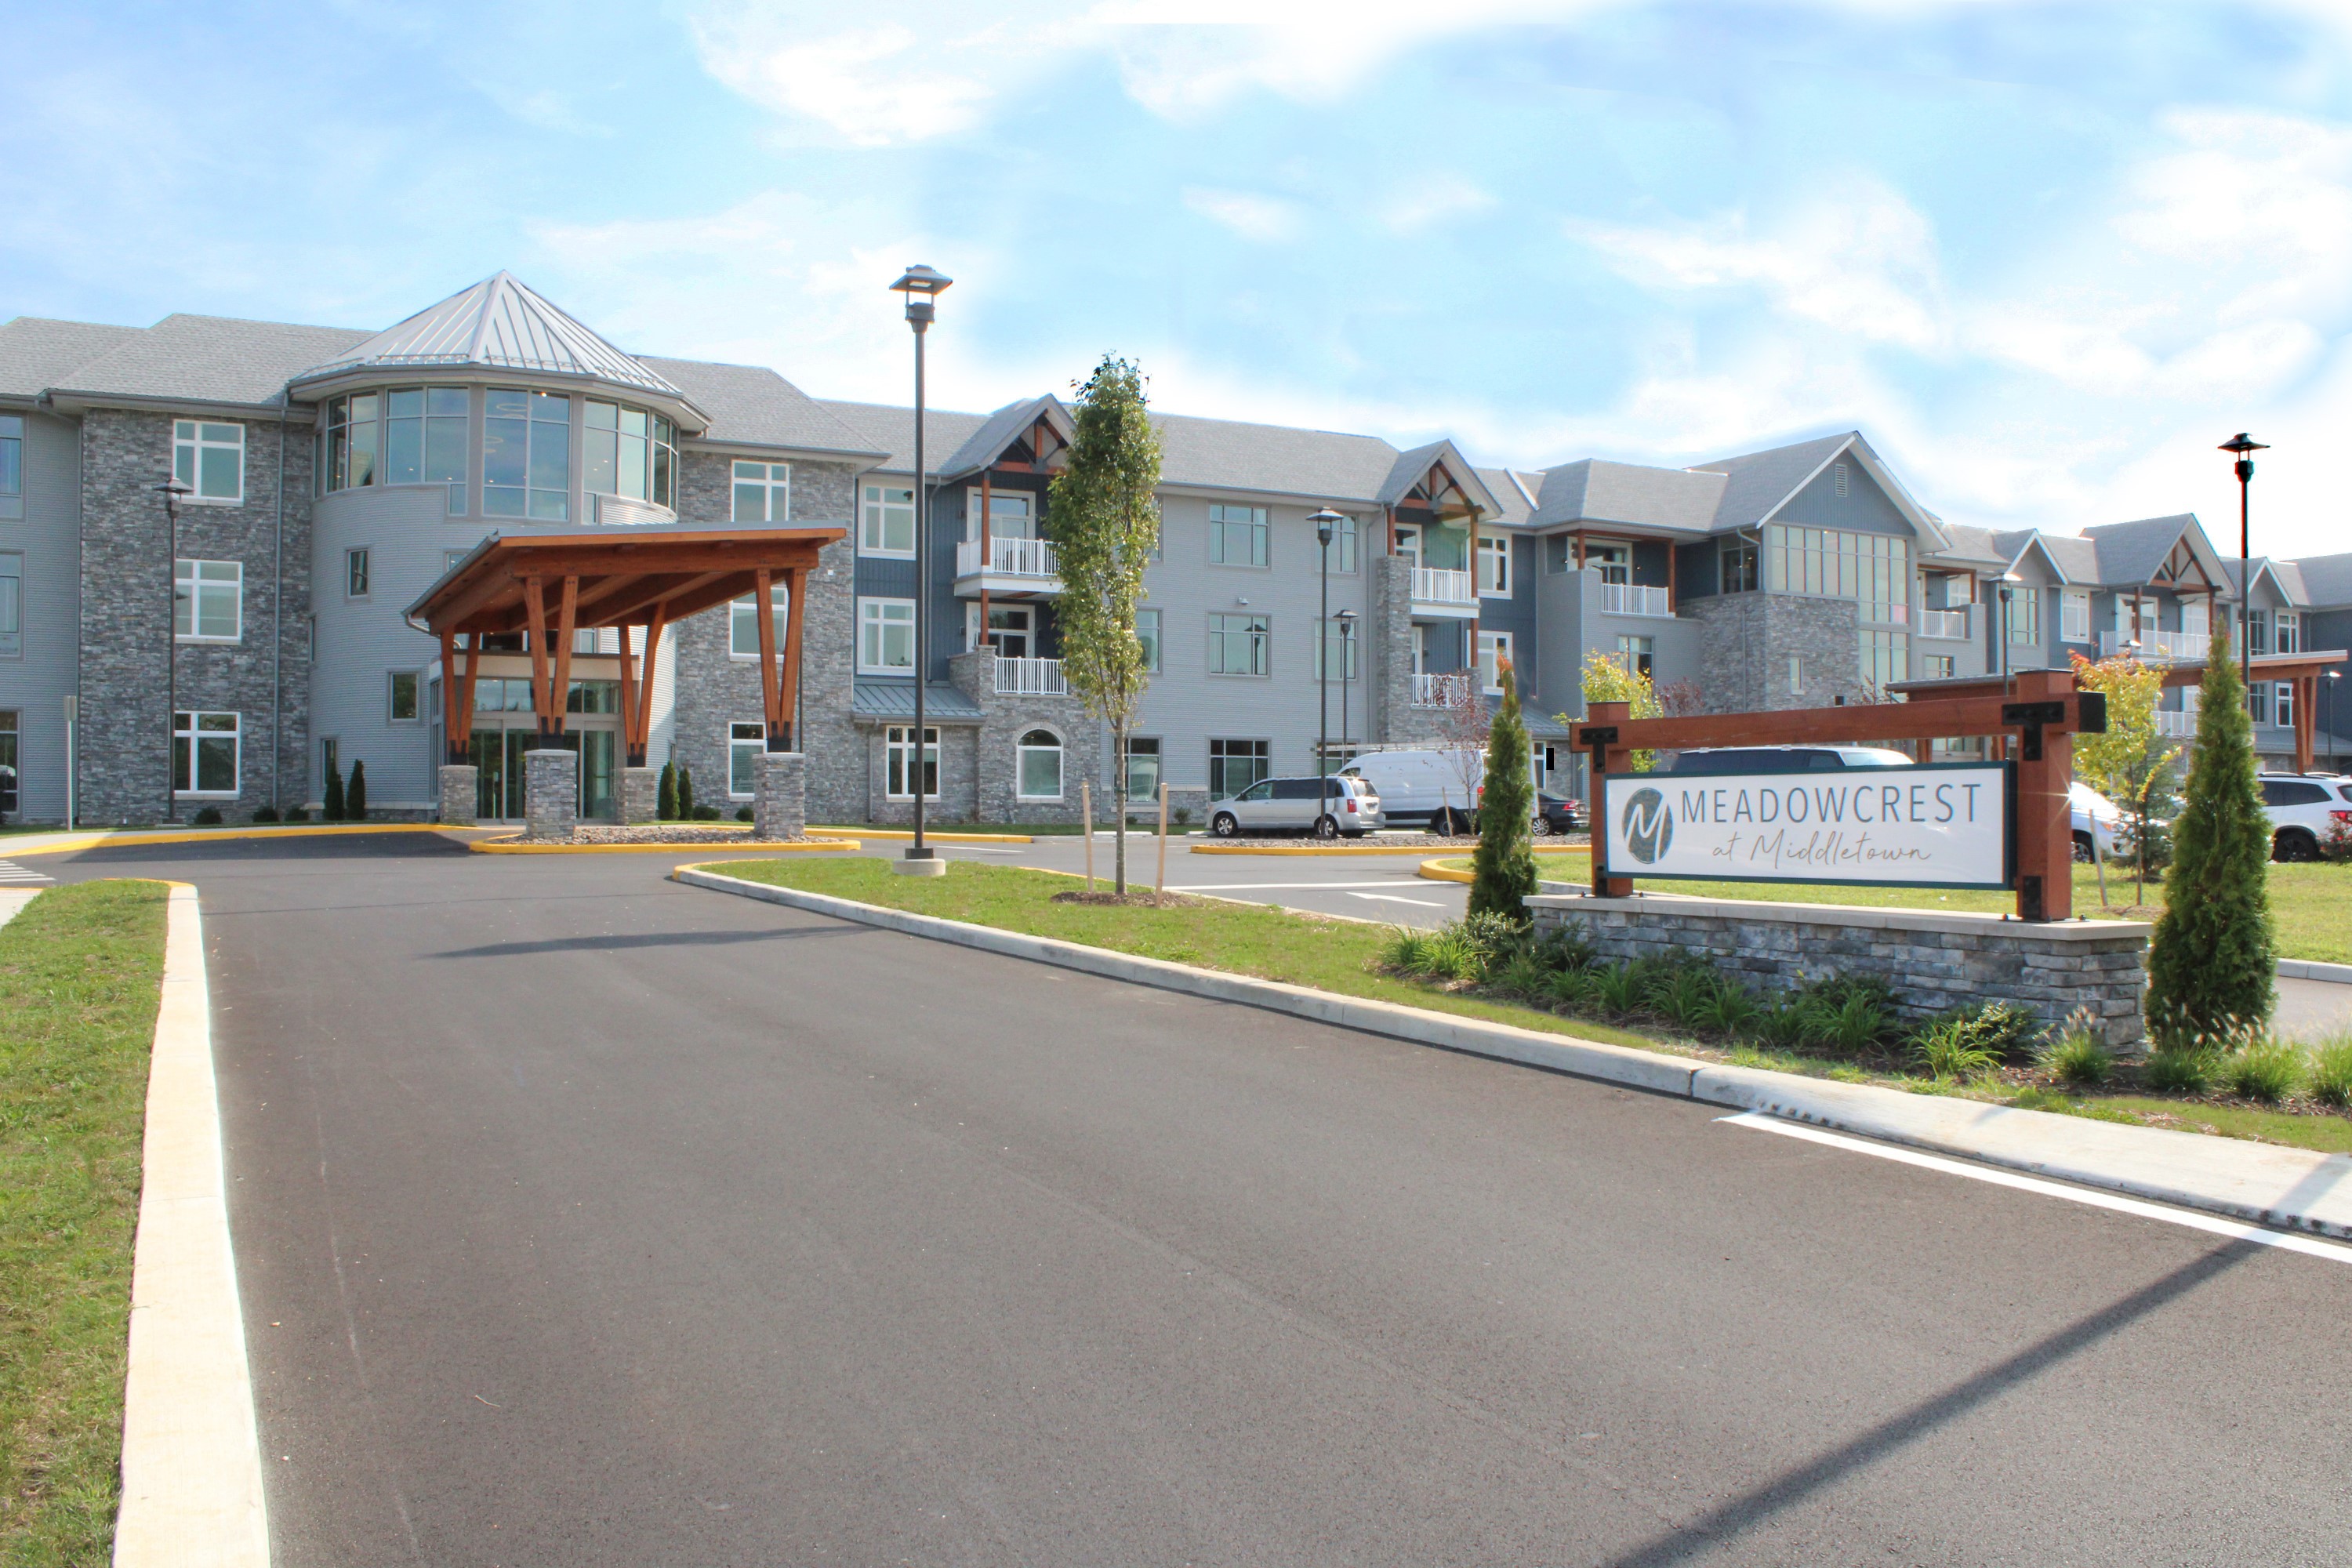 The Future of Senior Living is Finally Open in Middletown – and Already the "Best of" Upstate Delaware